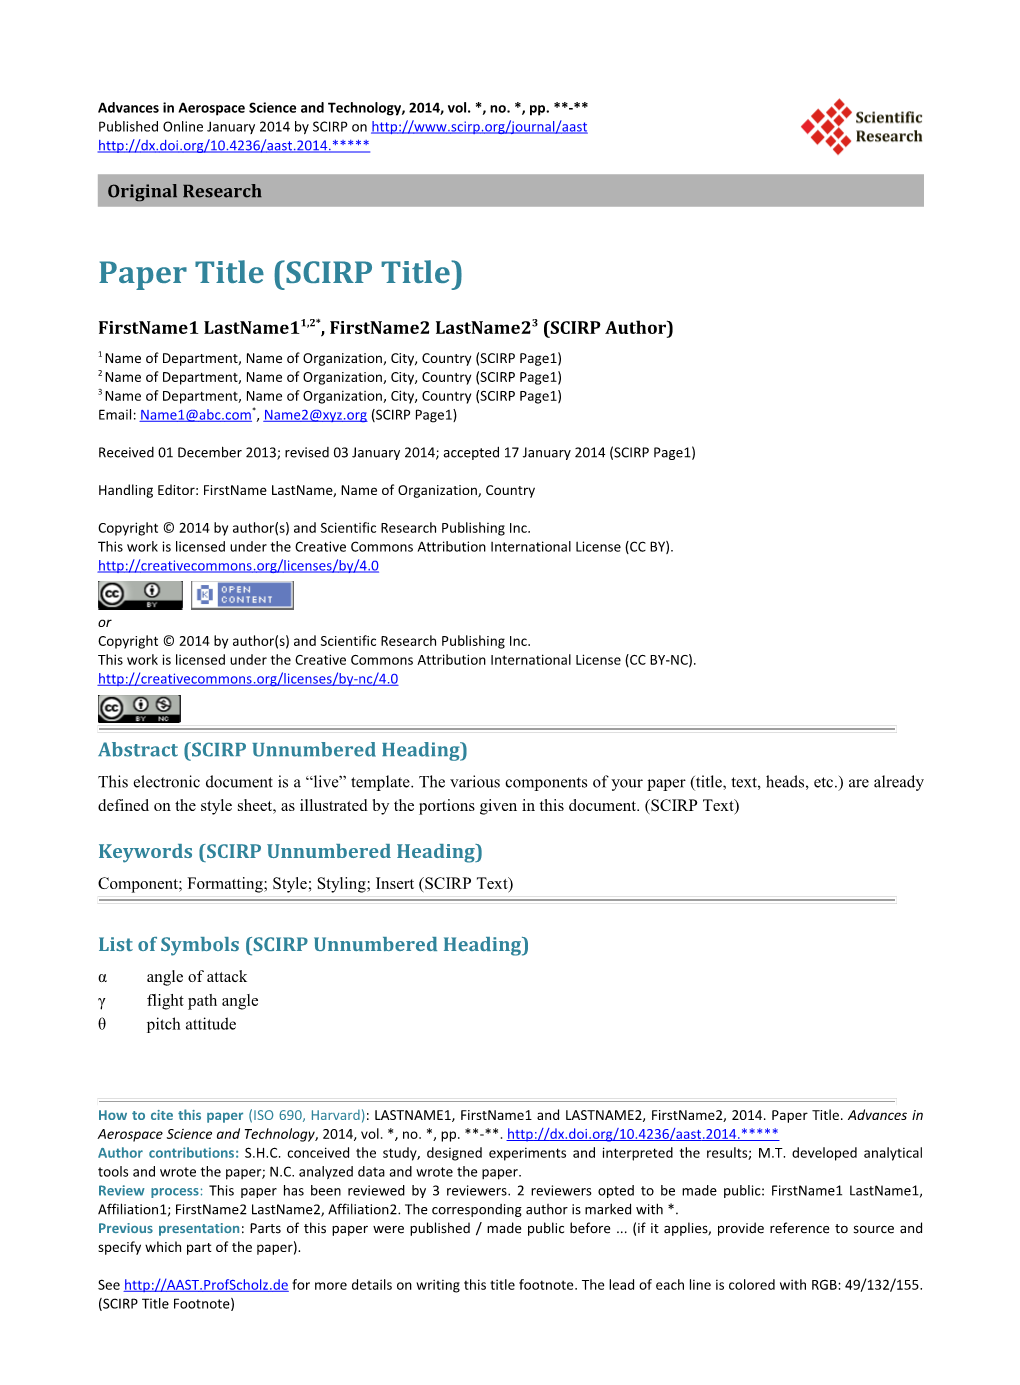 Template for SCIRP-Journal AAST